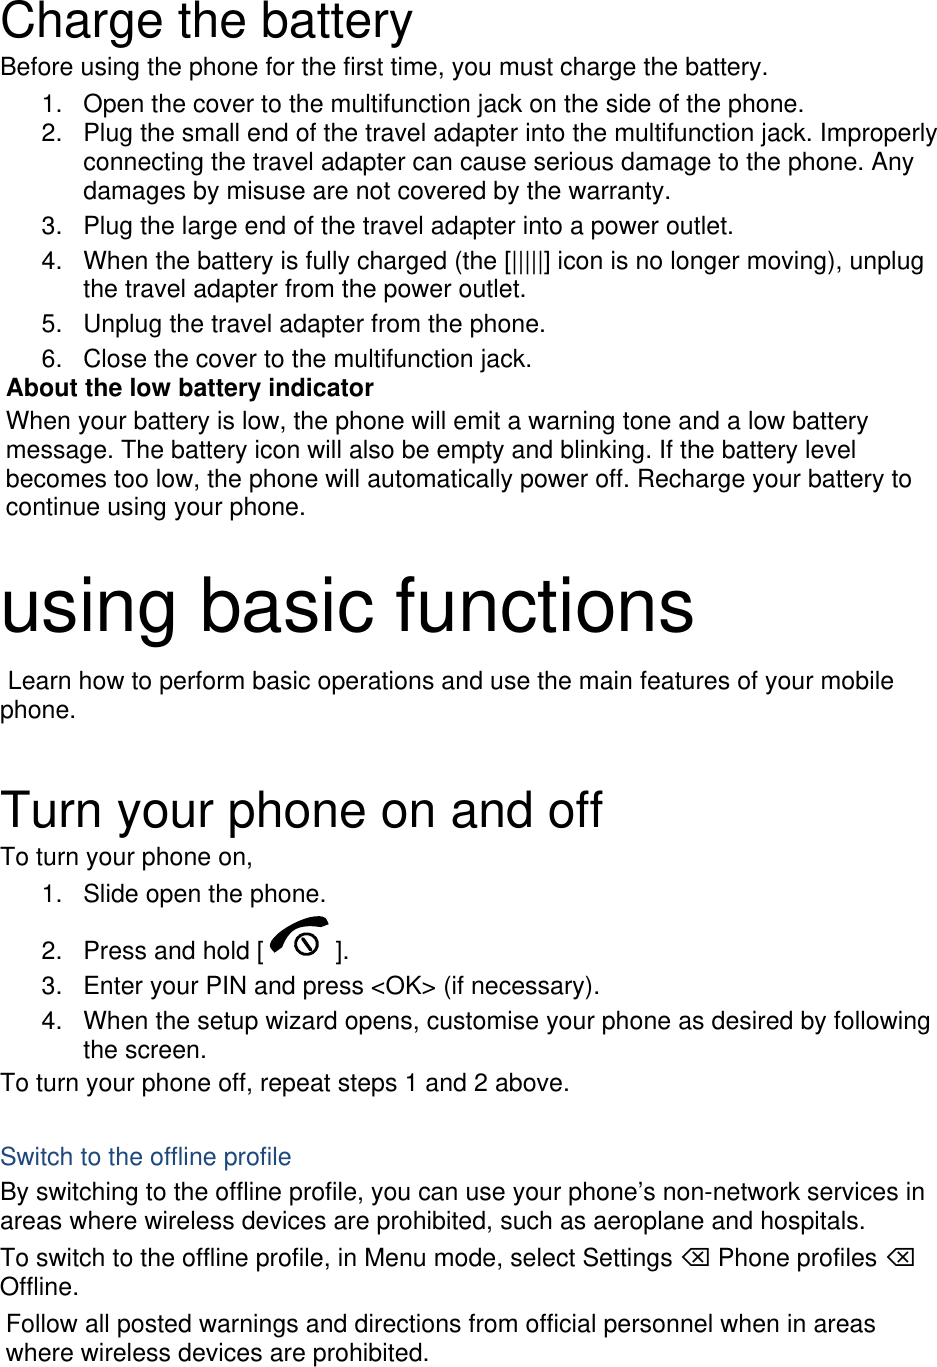  Charge the battery Before using the phone for the first time, you must charge the battery. 1.  Open the cover to the multifunction jack on the side of the phone. 2.  Plug the small end of the travel adapter into the multifunction jack. Improperly connecting the travel adapter can cause serious damage to the phone. Any damages by misuse are not covered by the warranty. 3.  Plug the large end of the travel adapter into a power outlet. 4.  When the battery is fully charged (the [|||||] icon is no longer moving), unplug the travel adapter from the power outlet. 5.  Unplug the travel adapter from the phone. 6.  Close the cover to the multifunction jack. About the low battery indicator When your battery is low, the phone will emit a warning tone and a low battery message. The battery icon will also be empty and blinking. If the battery level becomes too low, the phone will automatically power off. Recharge your battery to continue using your phone.  using basic functions  Learn how to perform basic operations and use the main features of your mobile phone.   Turn your phone on and off To turn your phone on, 1.  Slide open the phone. 2.  Press and hold [ ]. 3.  Enter your PIN and press &lt;OK&gt; (if necessary). 4.  When the setup wizard opens, customise your phone as desired by following the screen. To turn your phone off, repeat steps 1 and 2 above.  Switch to the offline profile By switching to the offline profile, you can use your phone’s non-network services in areas where wireless devices are prohibited, such as aeroplane and hospitals. To switch to the offline profile, in Menu mode, select Settings ⌫ Phone profiles ⌫ Offline. Follow all posted warnings and directions from official personnel when in areas where wireless devices are prohibited. 